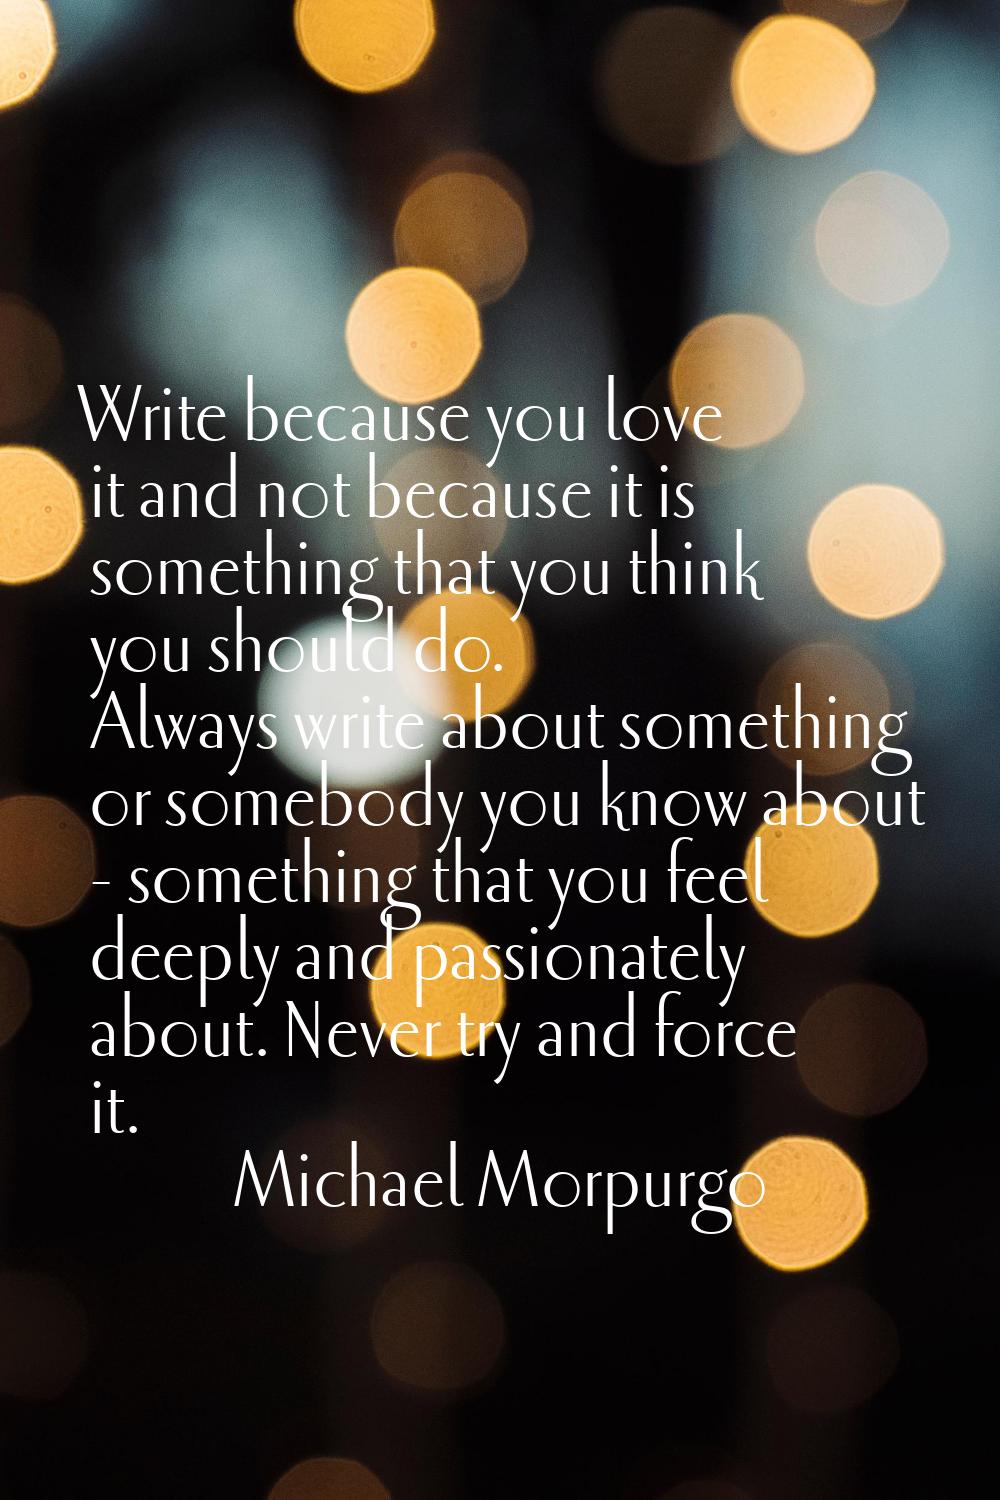 Write because you love it and not because it is something that you think you should do. Always writ